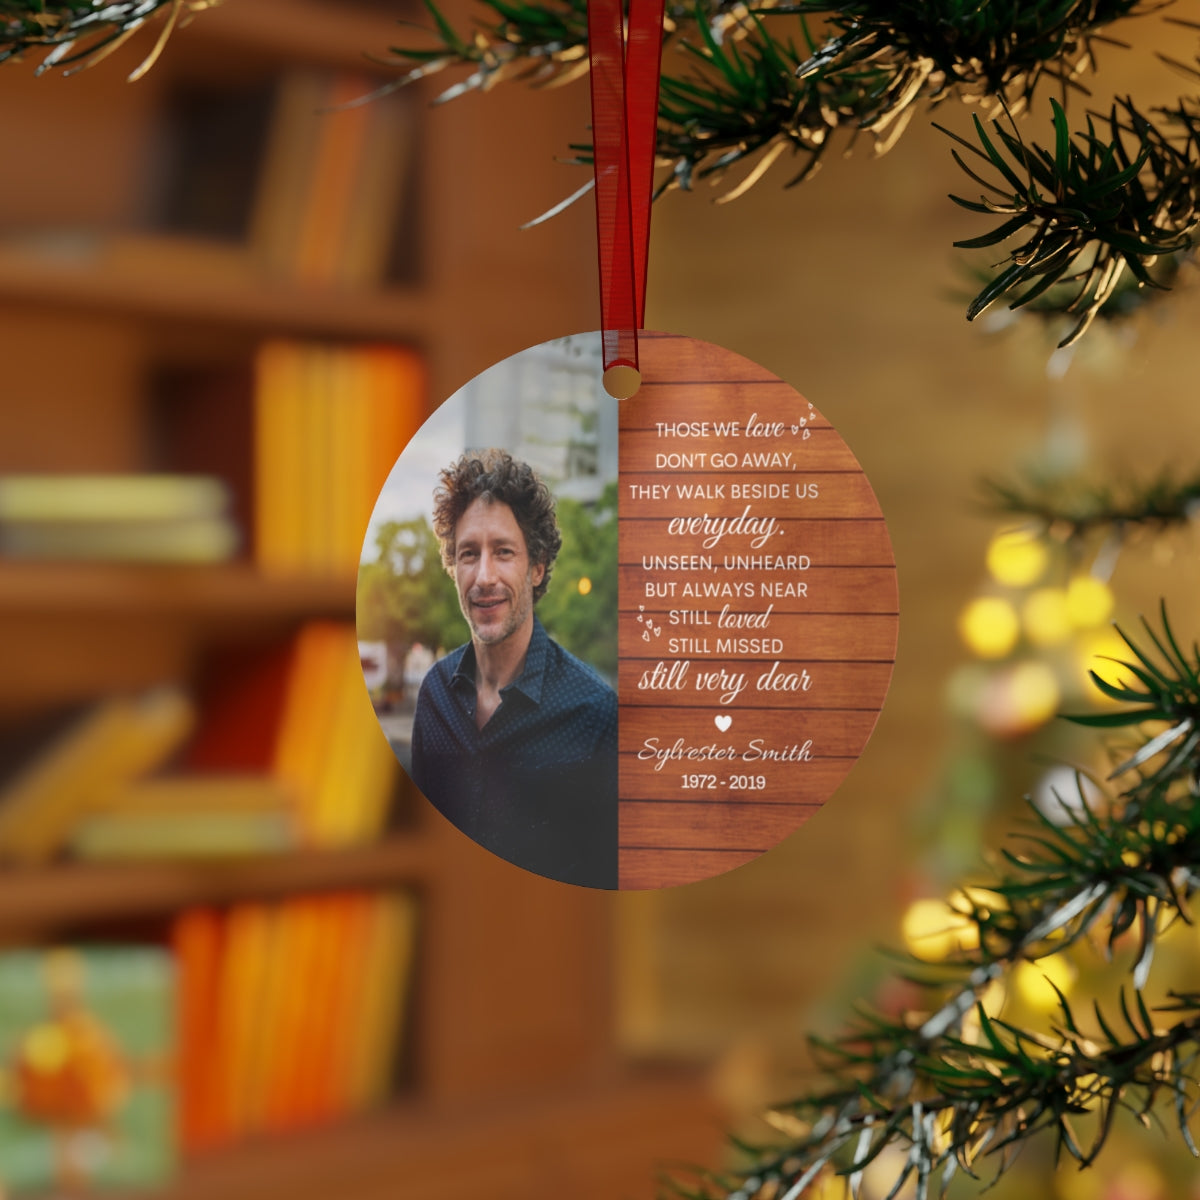 Remembrance Ornament Gift